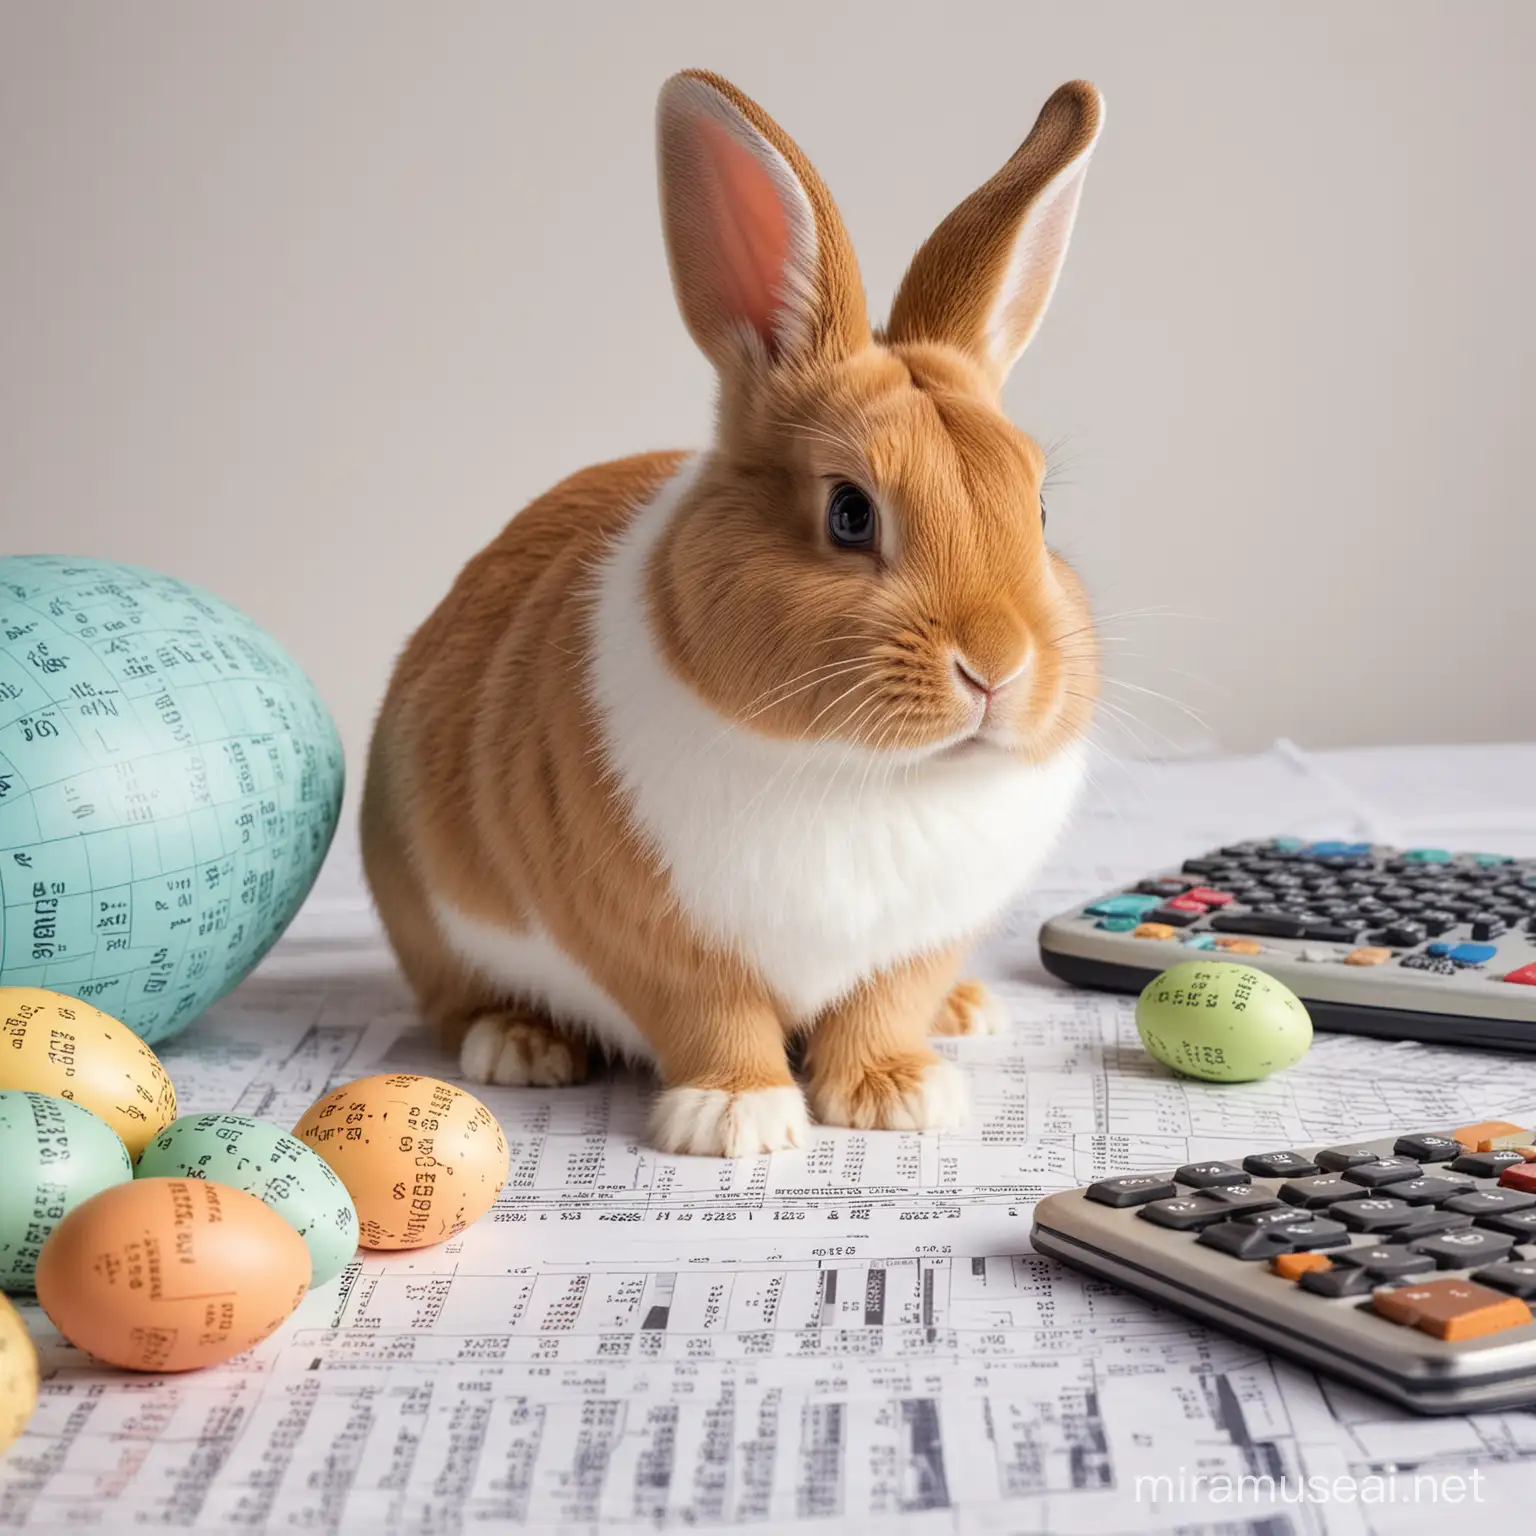 a bunny accountant crunching numbers or an Easter egg filled with financial charts. Let's highlight how our accounting services bring financial clarity and prosperity, just as Easter symbolizes new beginnings and abundance.